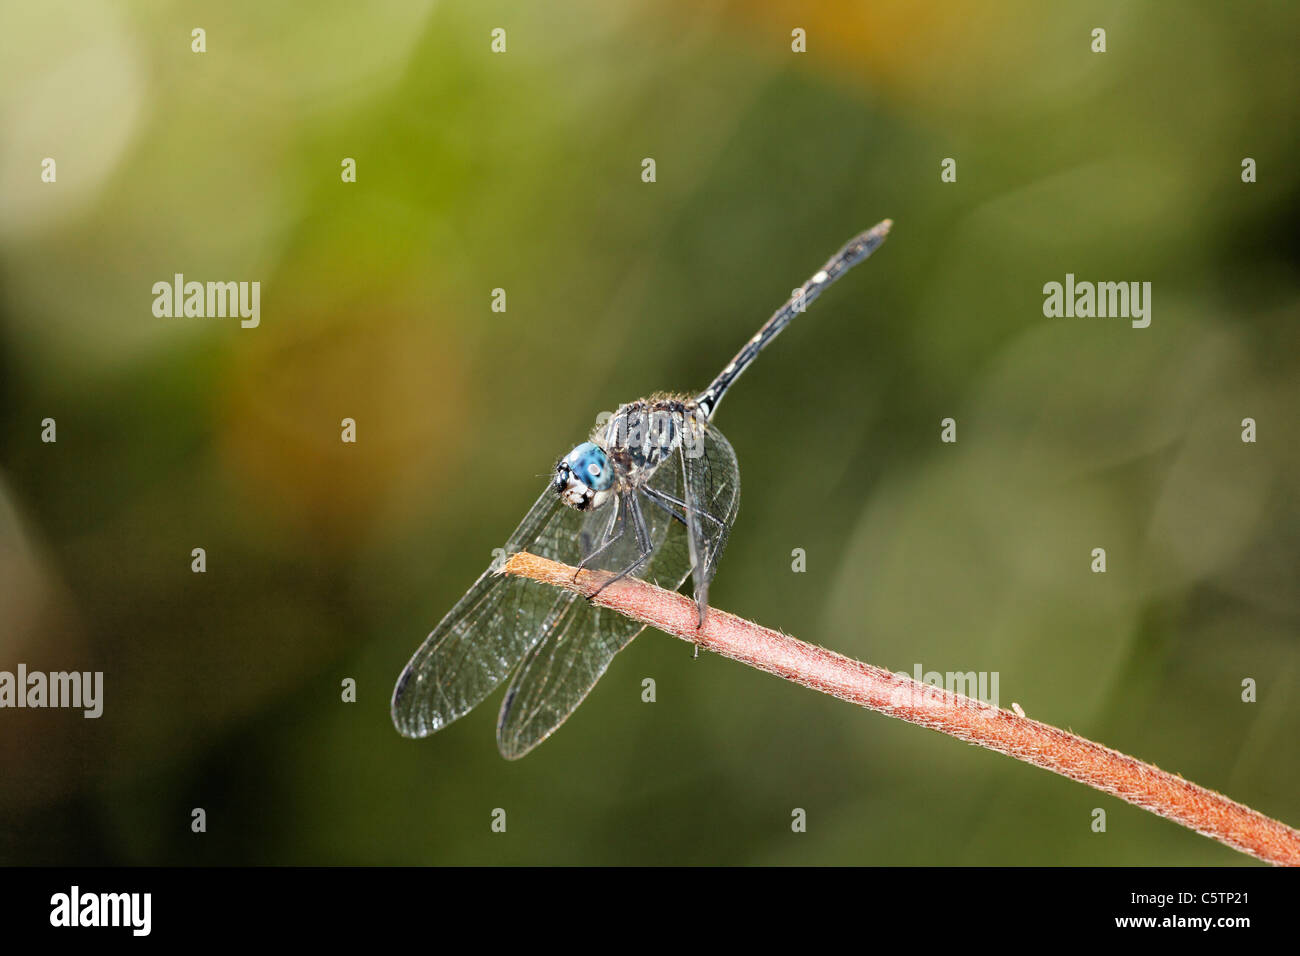 Costa Rica, Dragonfly on twig Stock Photo